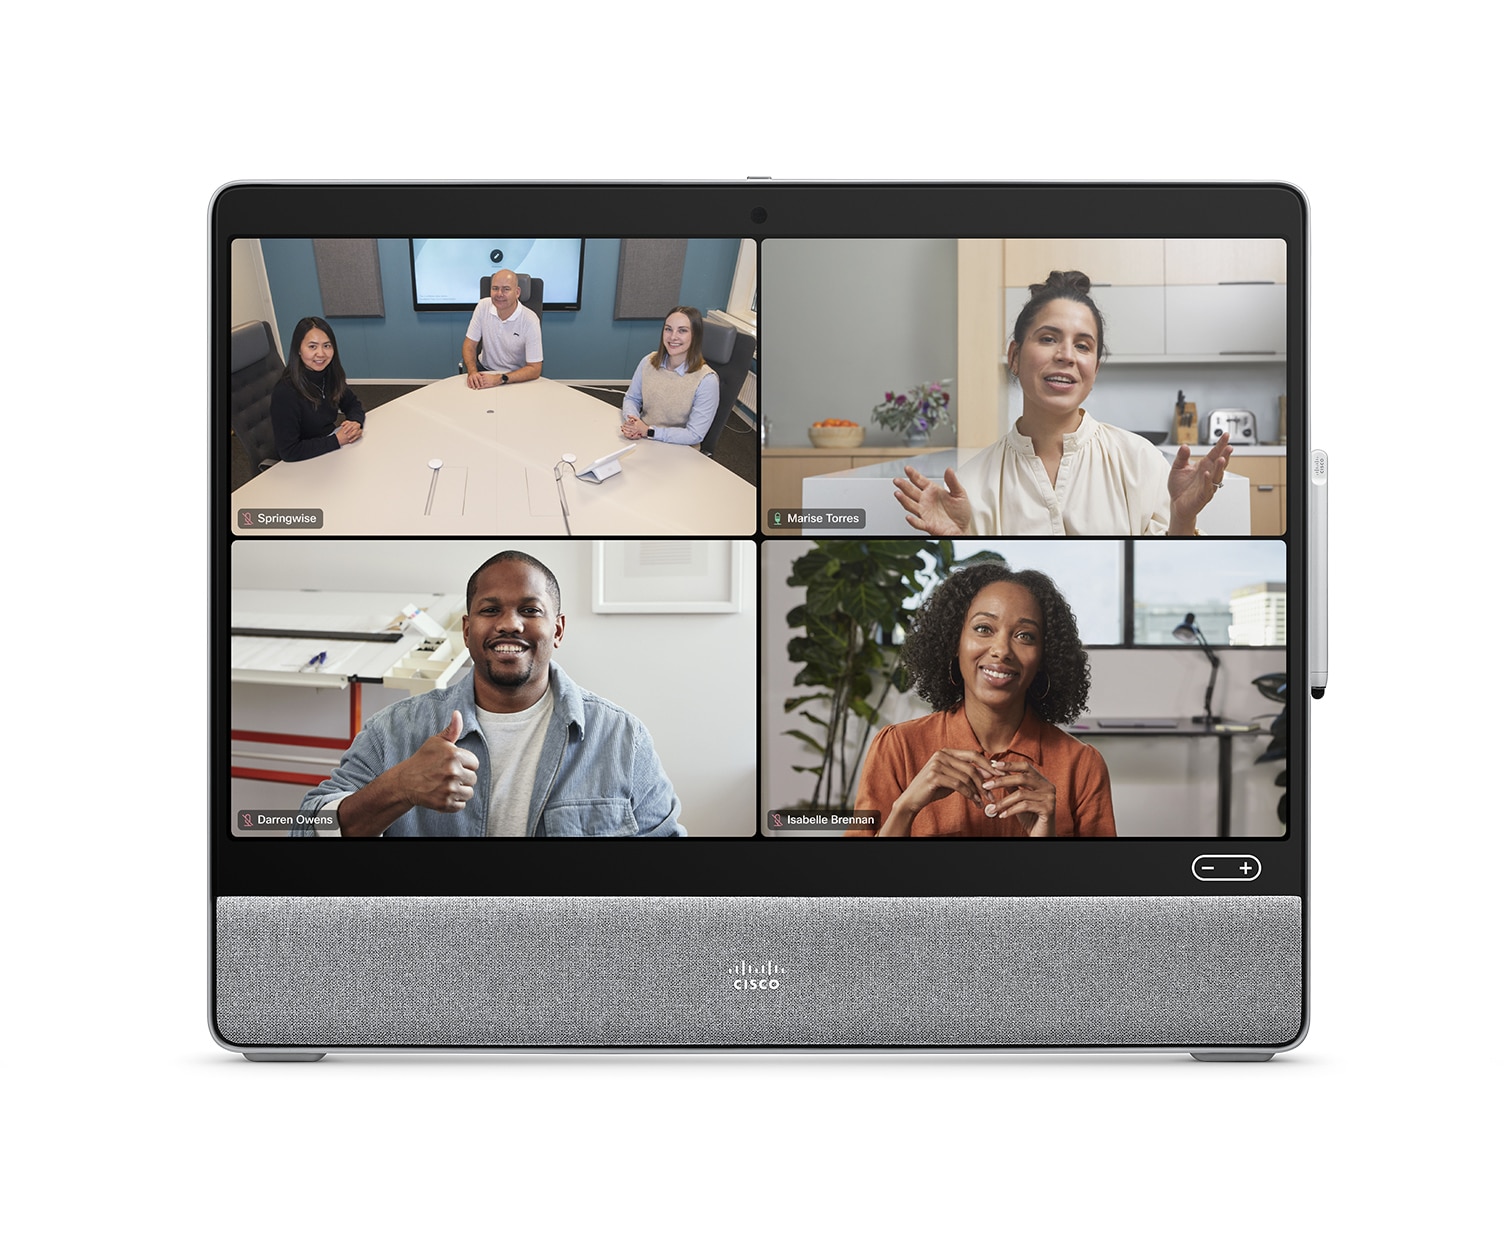 Grid view on Cisco Desk device with Webex meeting platform selected for video conference.